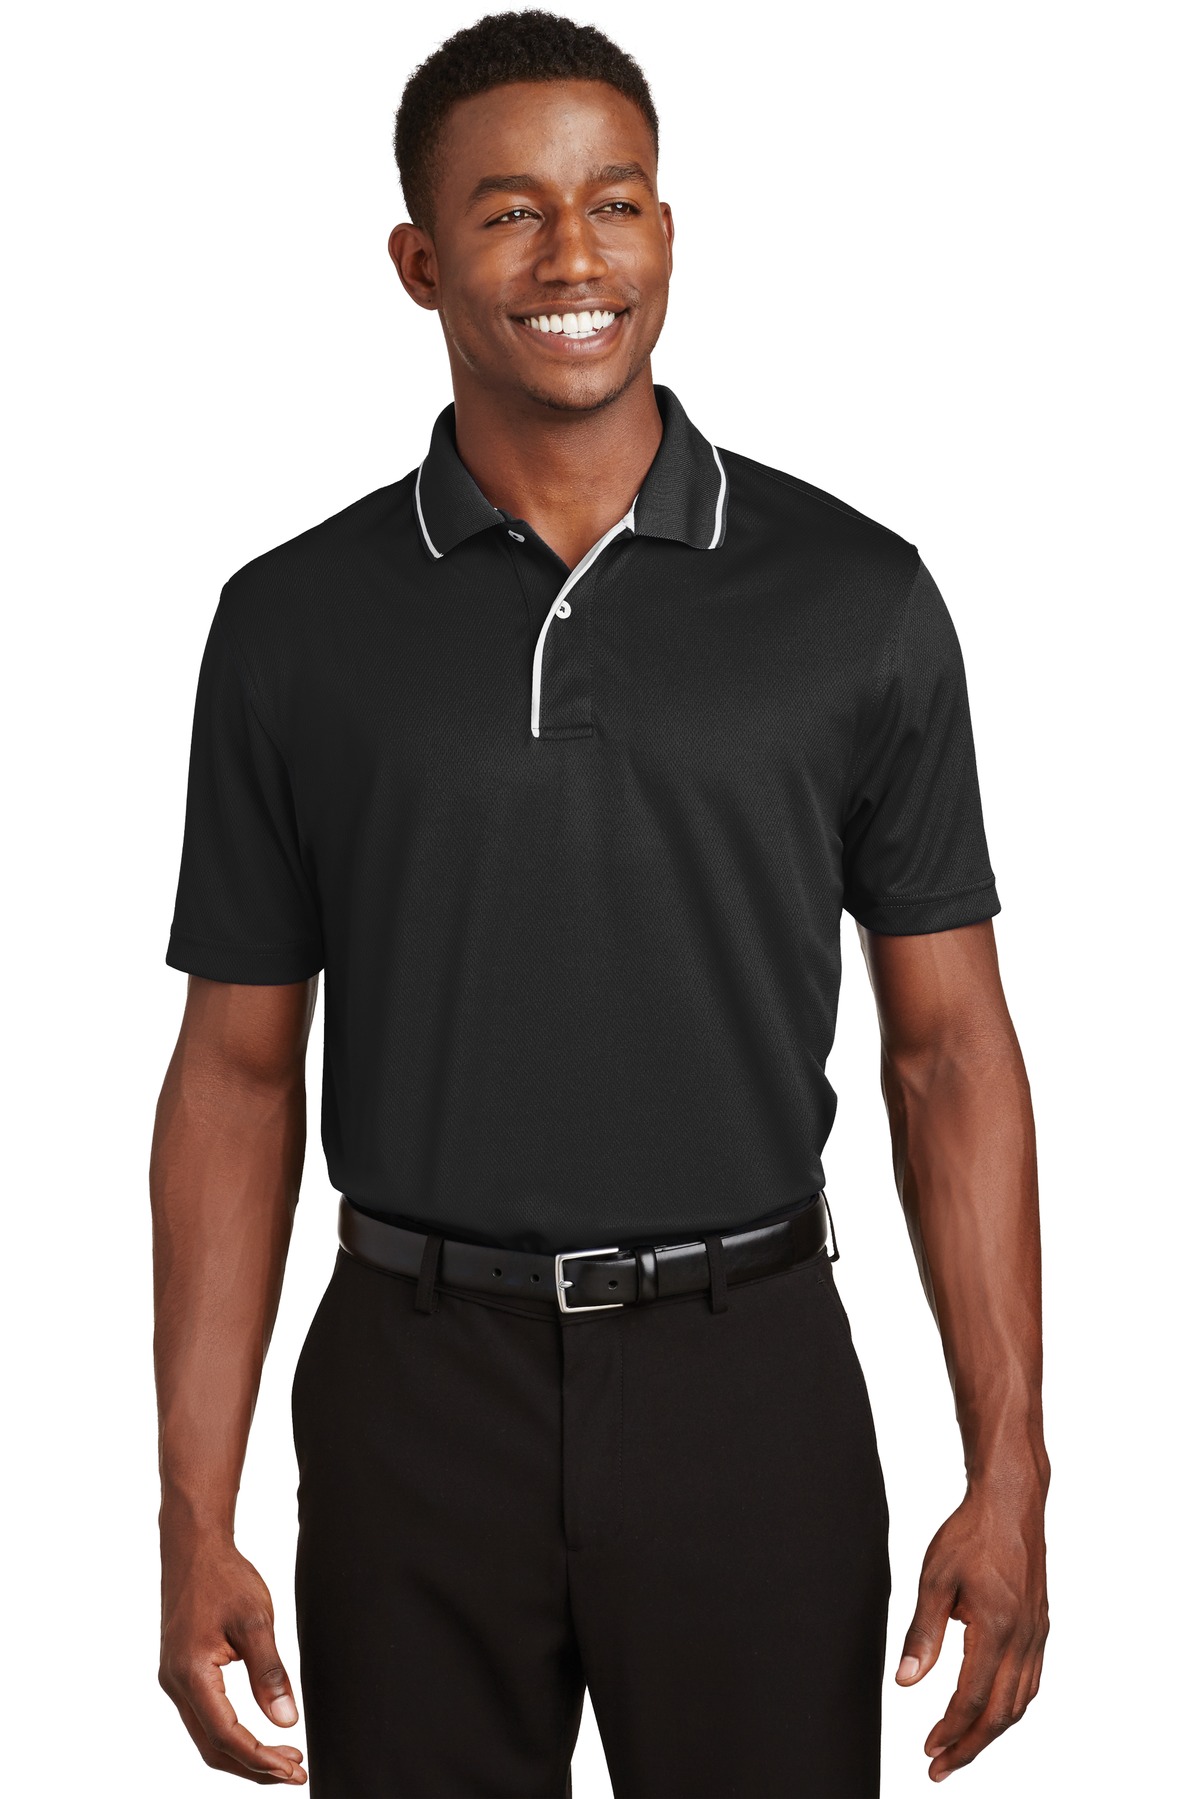 Sport-Tek Hospitality Polos & Knits ® Dri-Mesh® Polo with Tipped Collar and Piping.-Sport-Tek